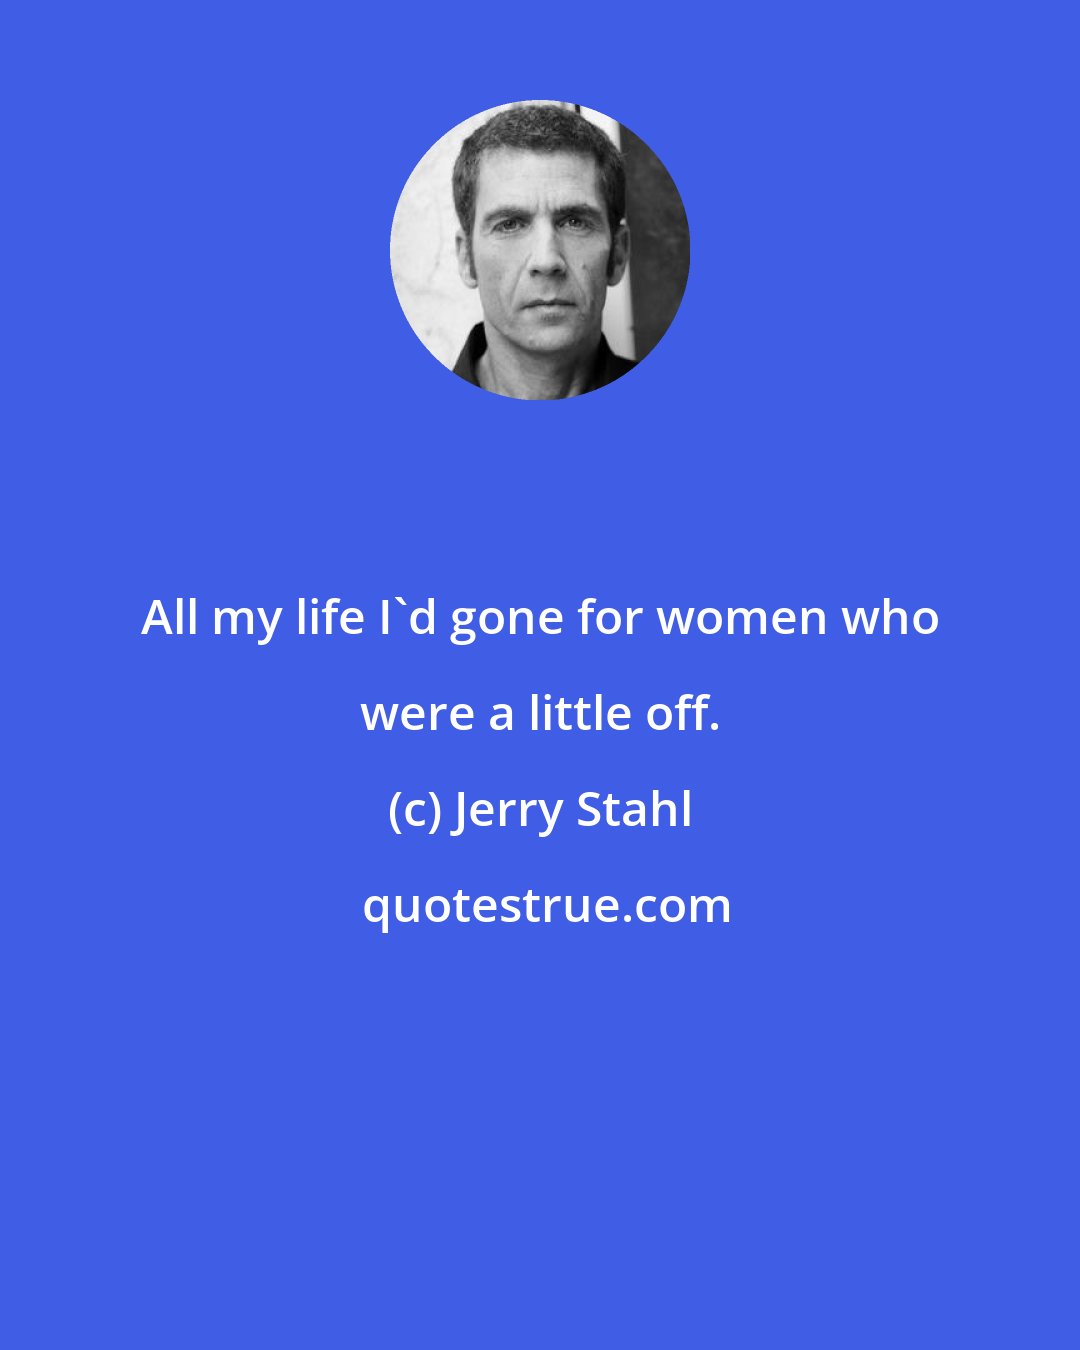 Jerry Stahl: All my life I'd gone for women who were a little off.